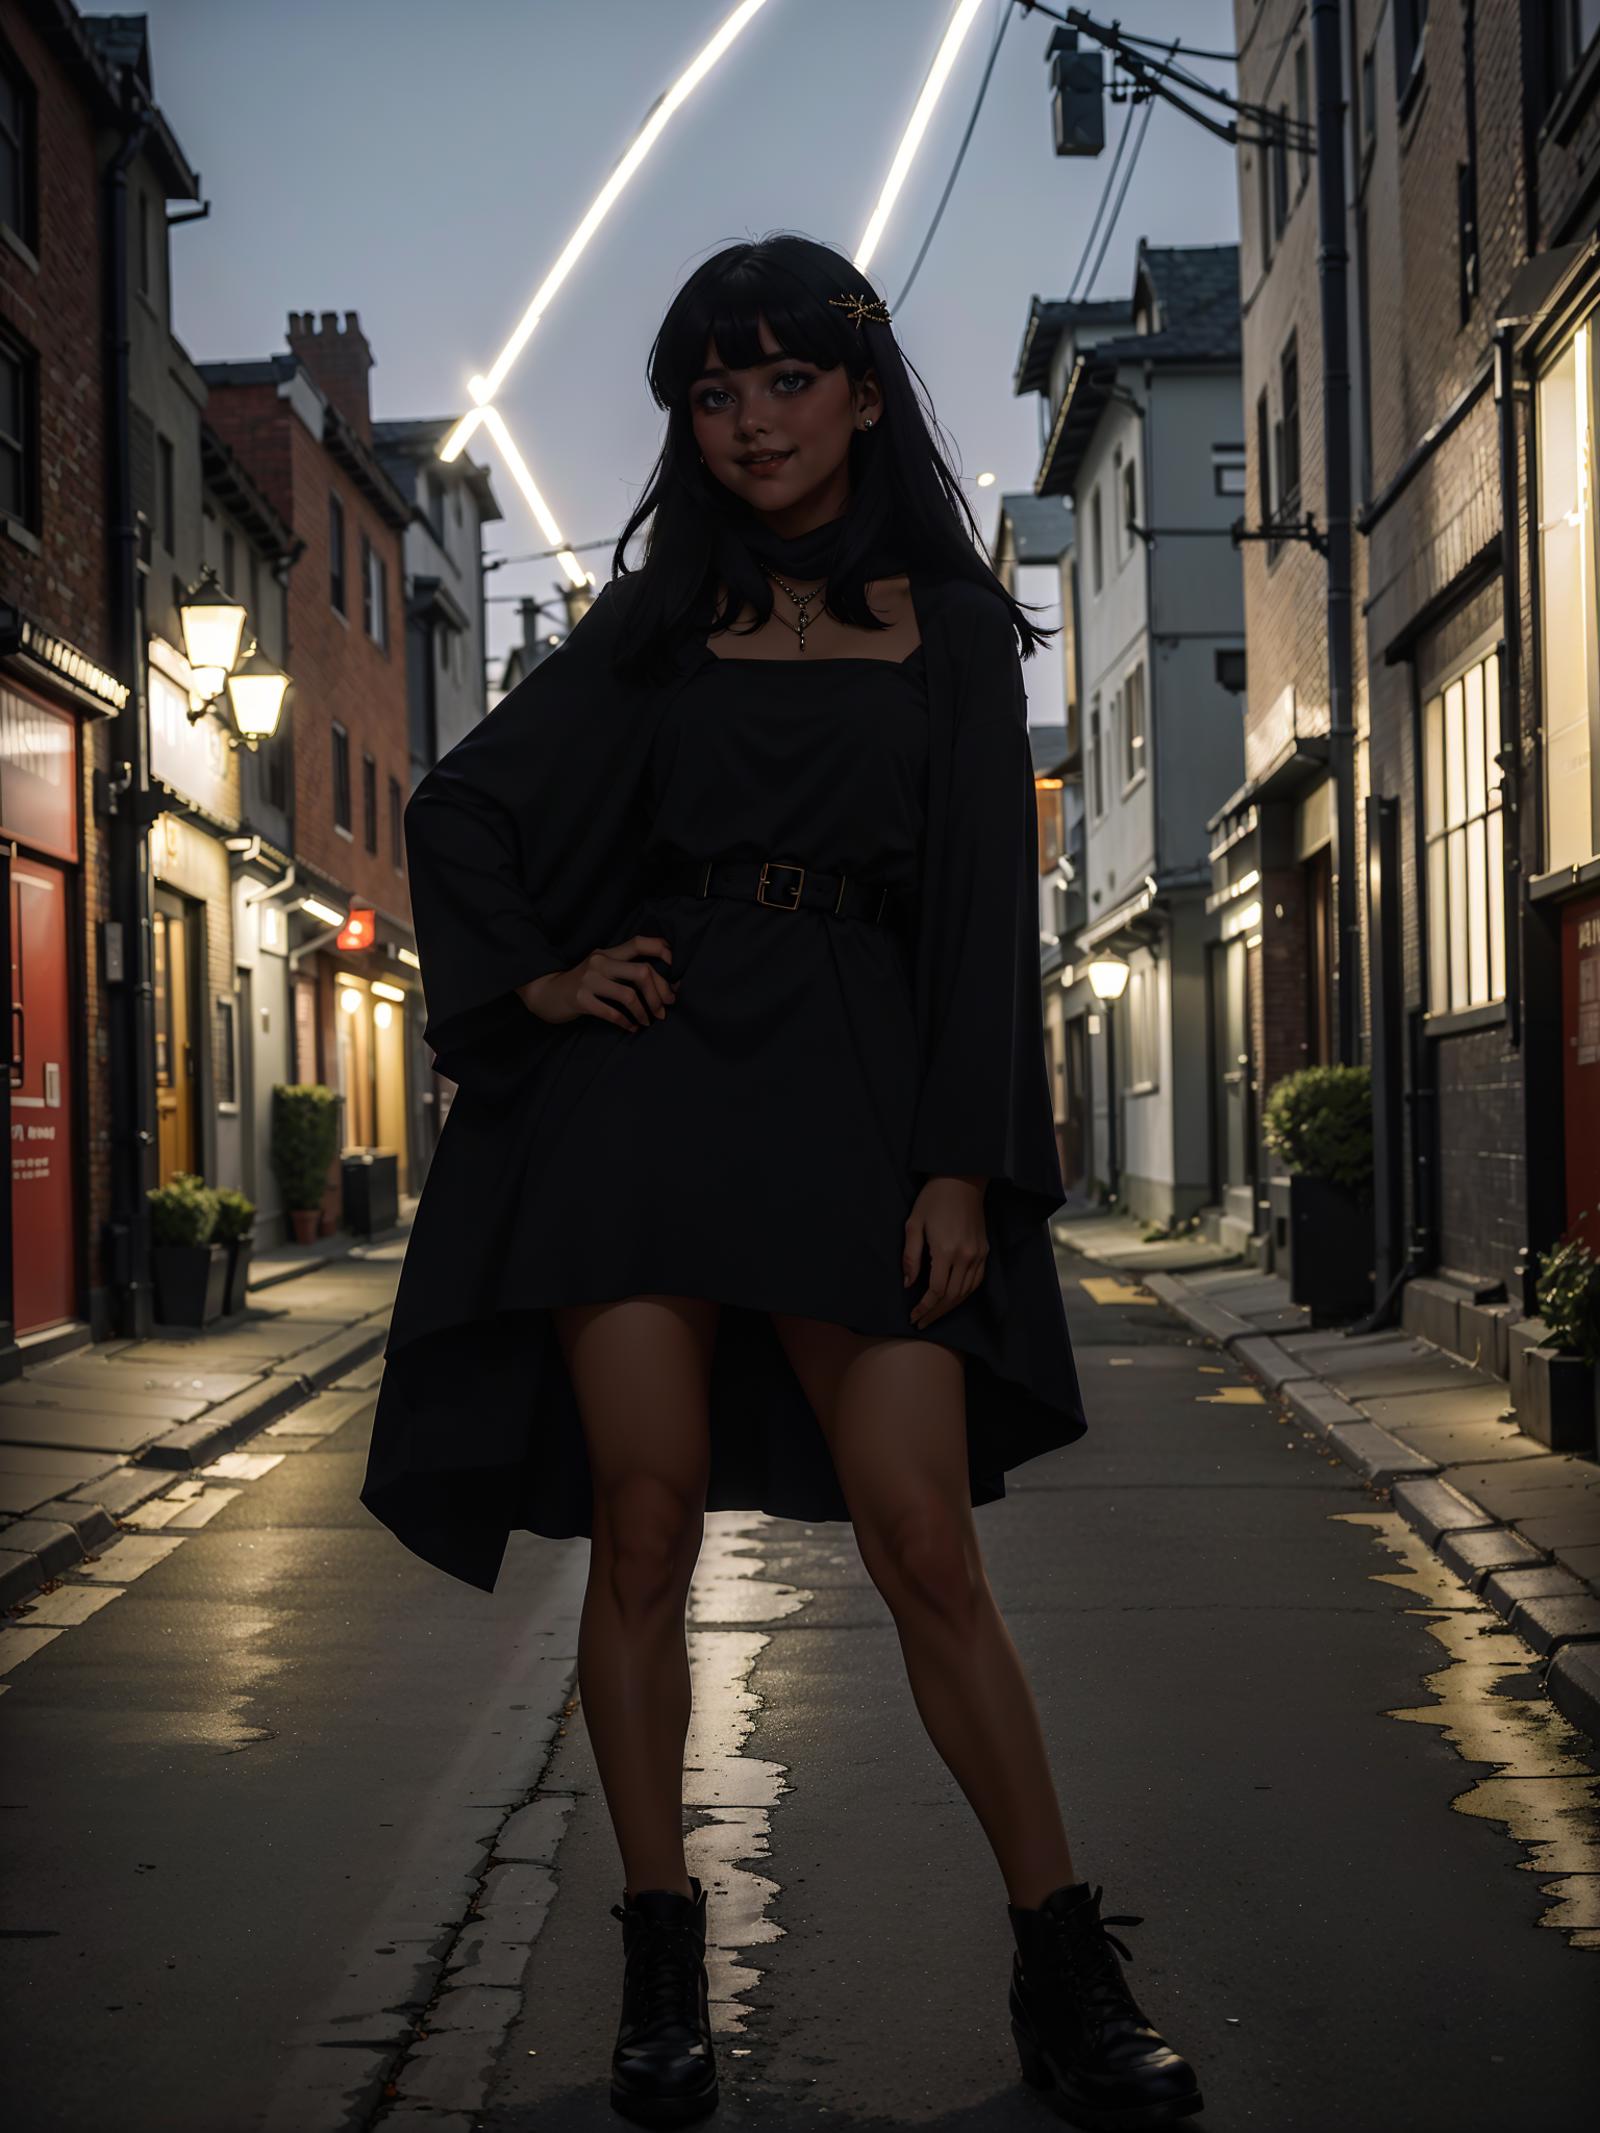 A woman in a black dress poses on a city street at night.